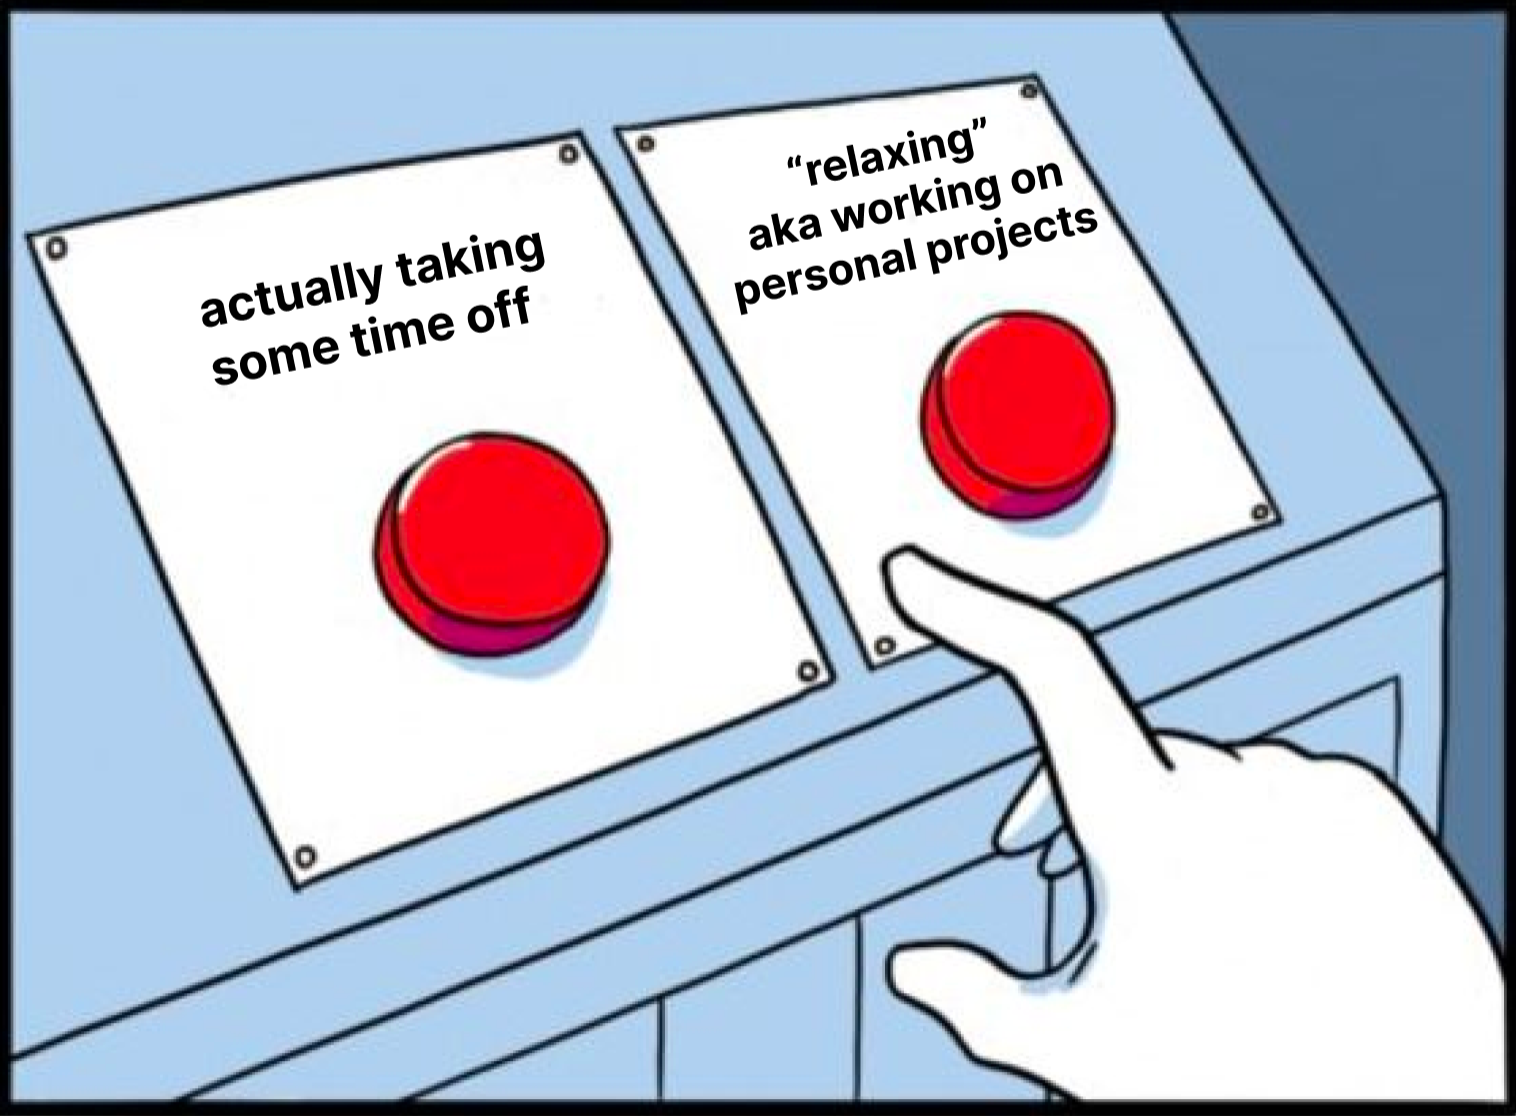 Meme of two red buttons that are hard to pick between. 1 says "actually taking some time off", the other says "relaxing aka working on personal projects"